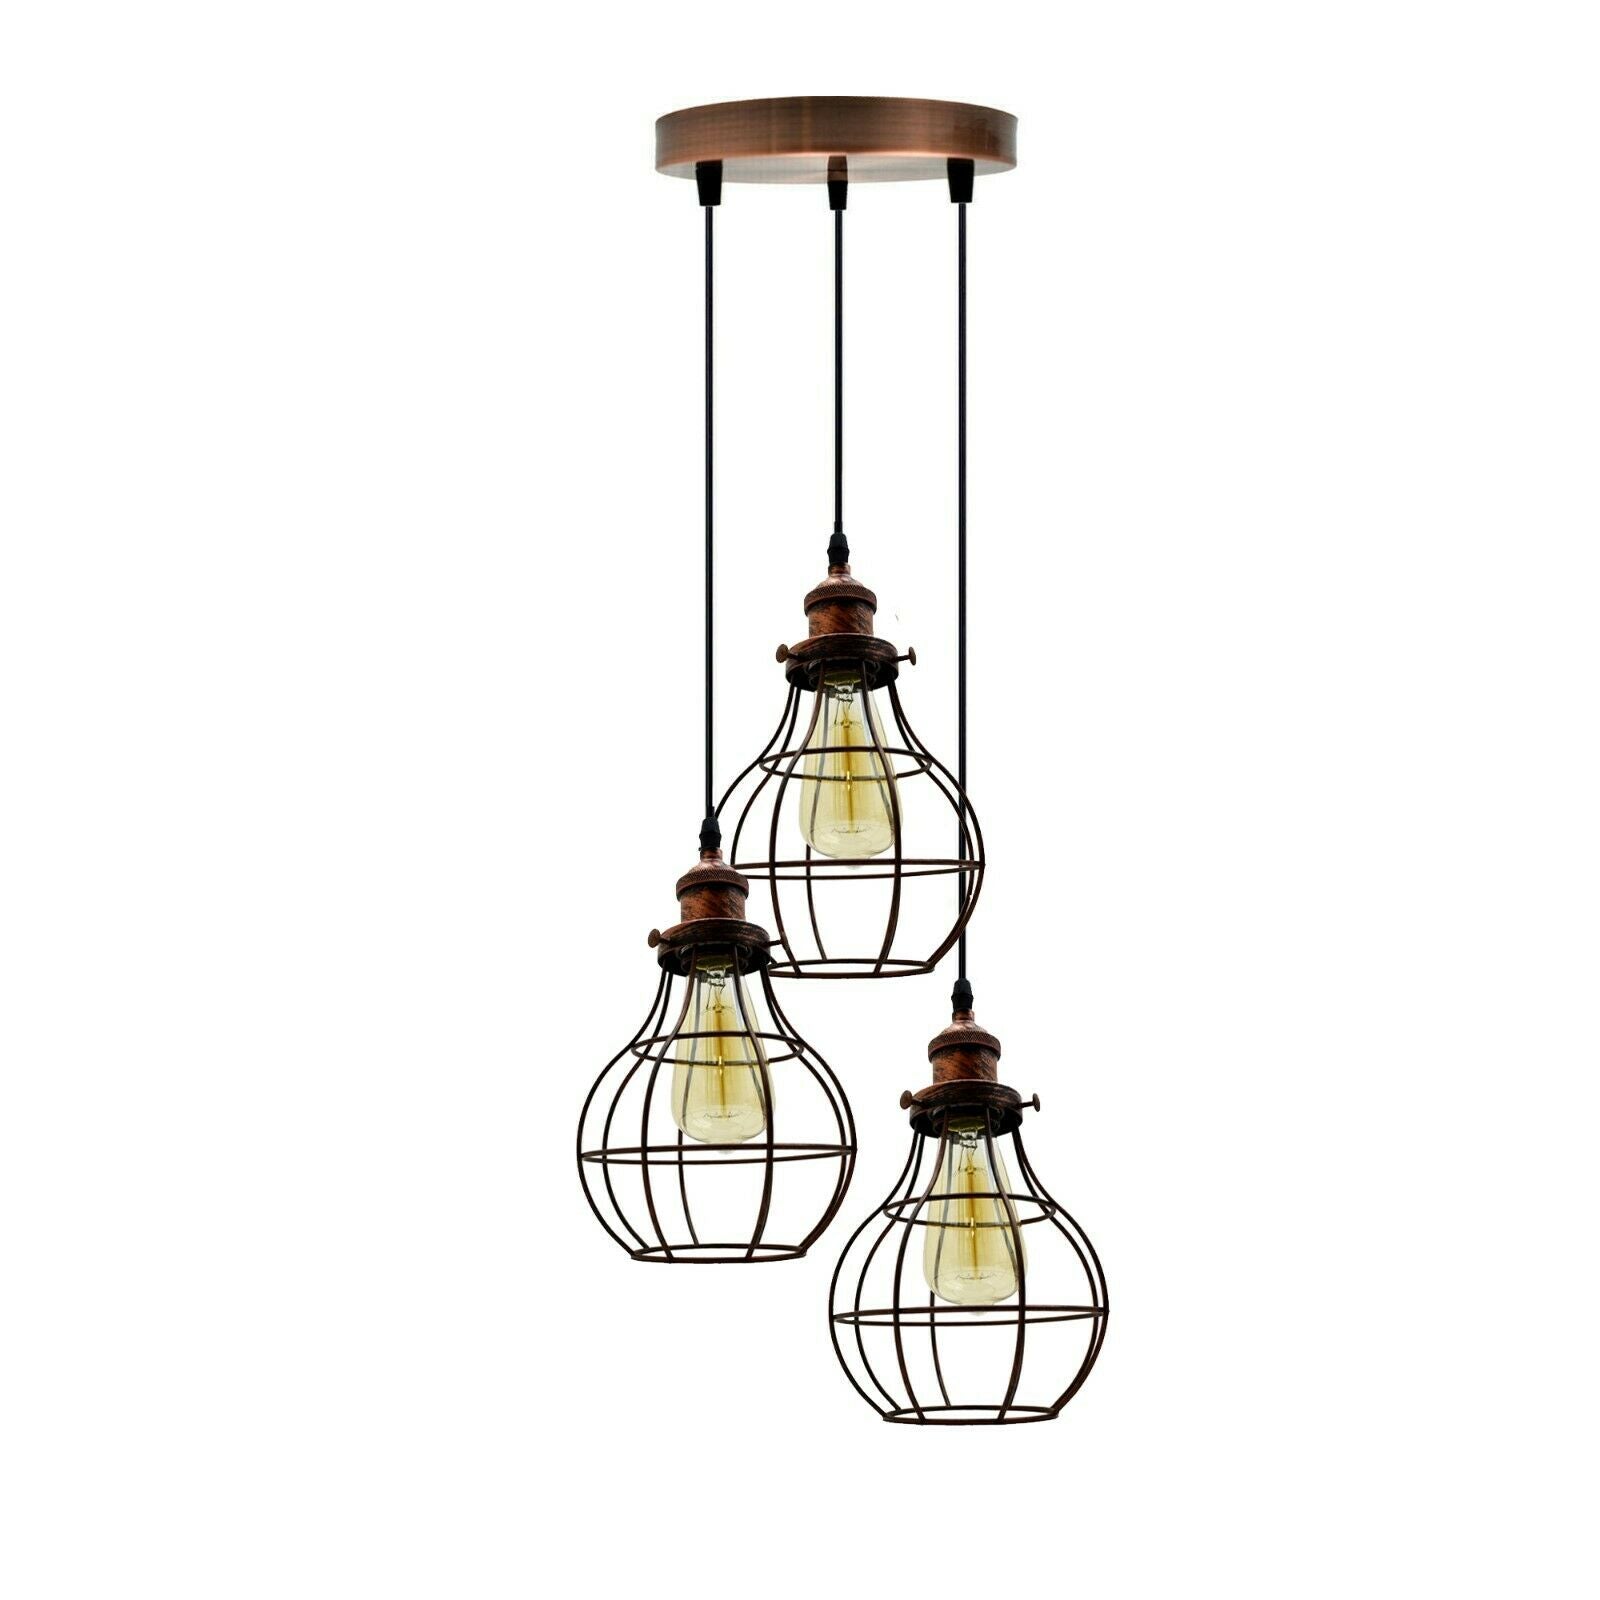  3 Way Ceiling Light - Rustic Red Wire Cage Pendant